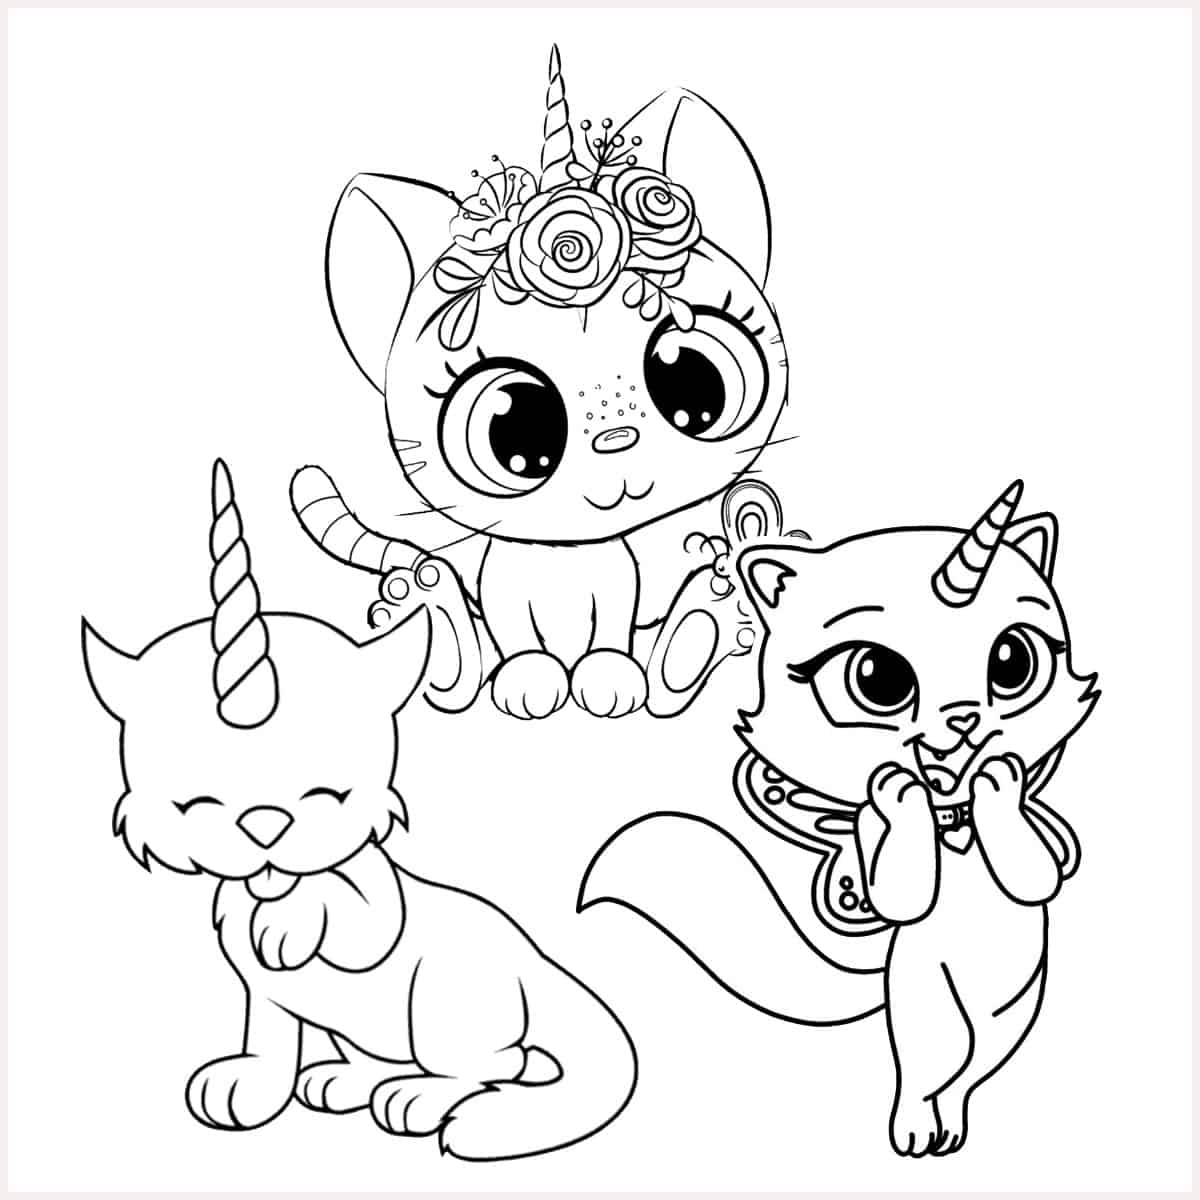 Printable felicity and other rbuk cats Coloring Page for kids.